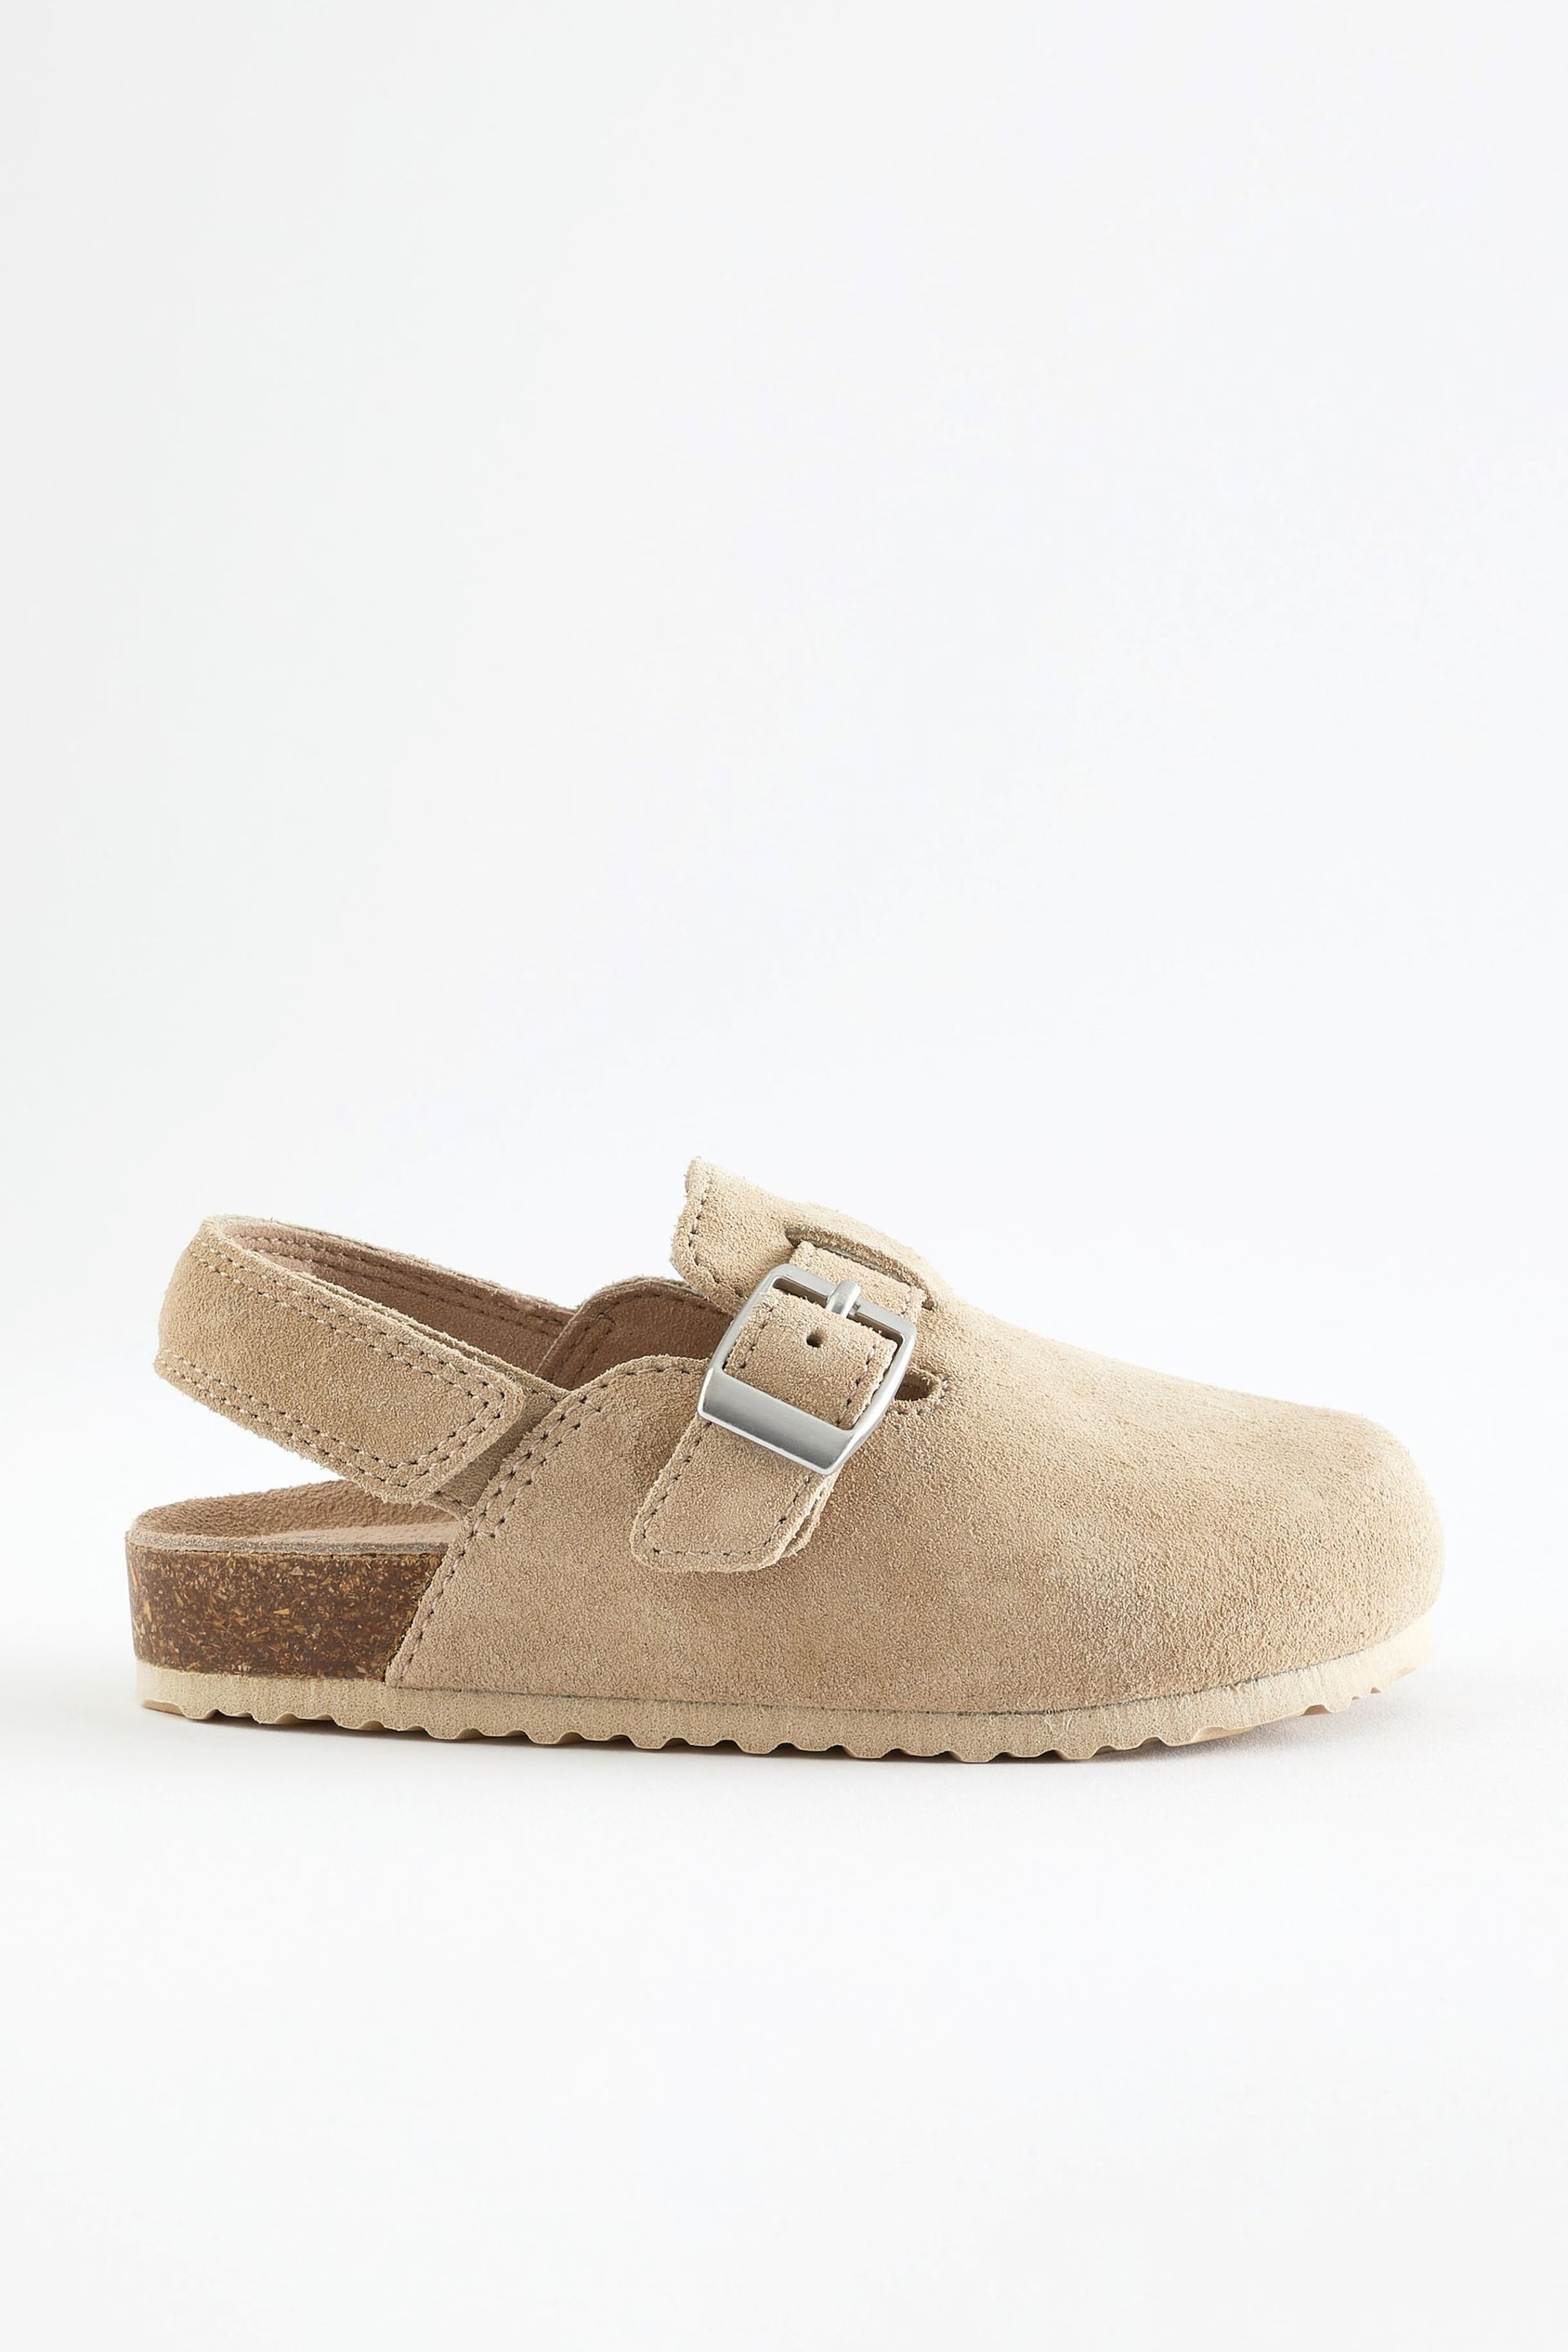 Sand Suede Clogs - Image 3 of 6